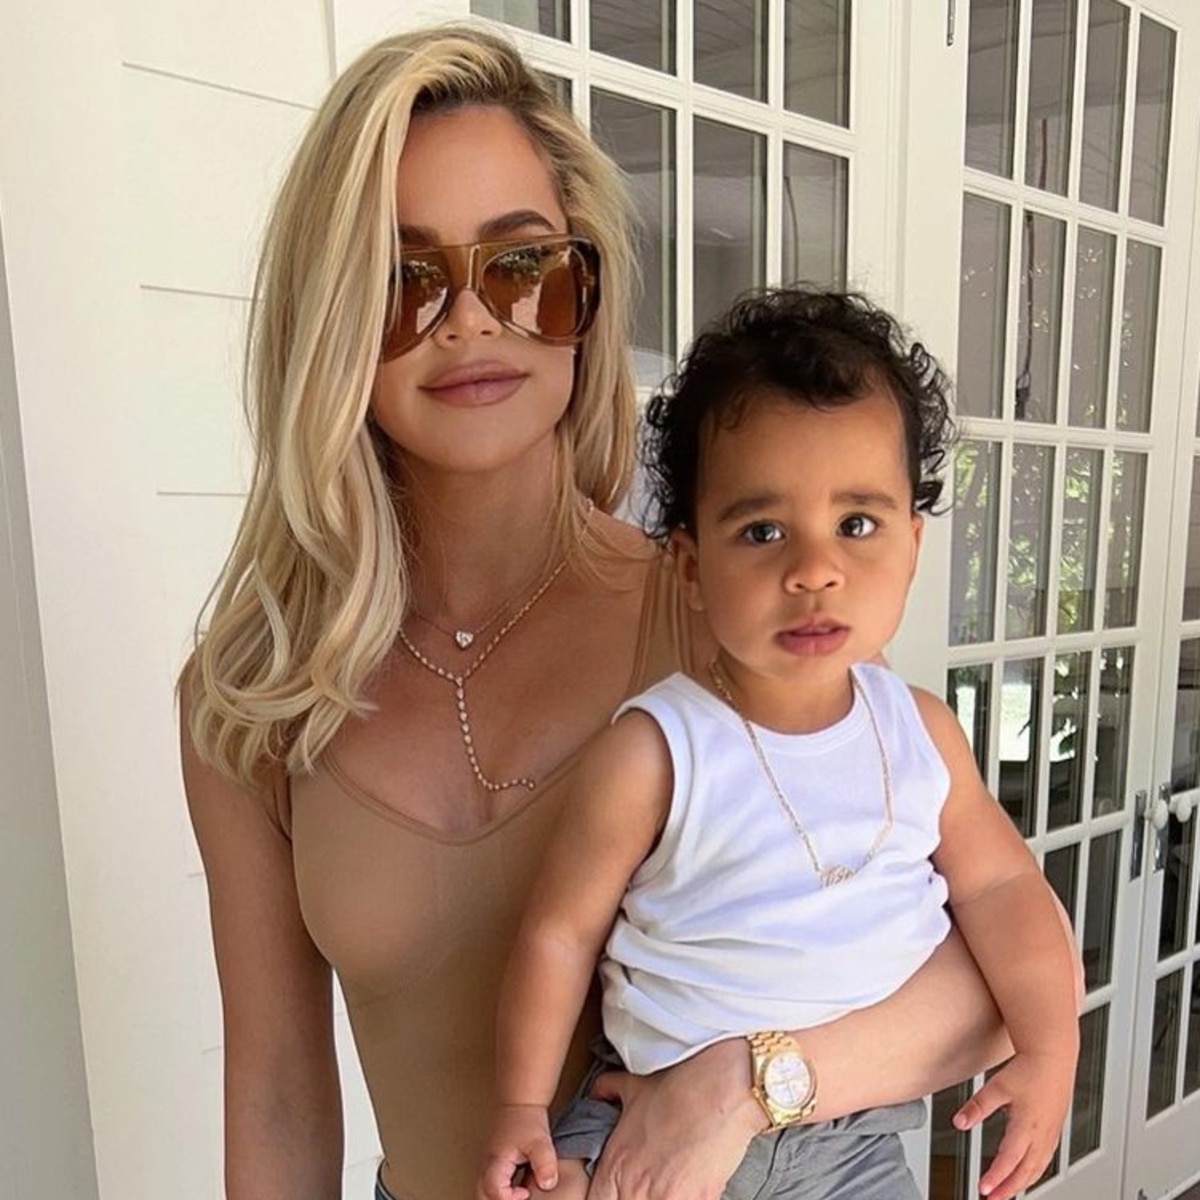 This New Glimpse of Khloe Kardashian’s Son Tatum May Be the Cutest Yet